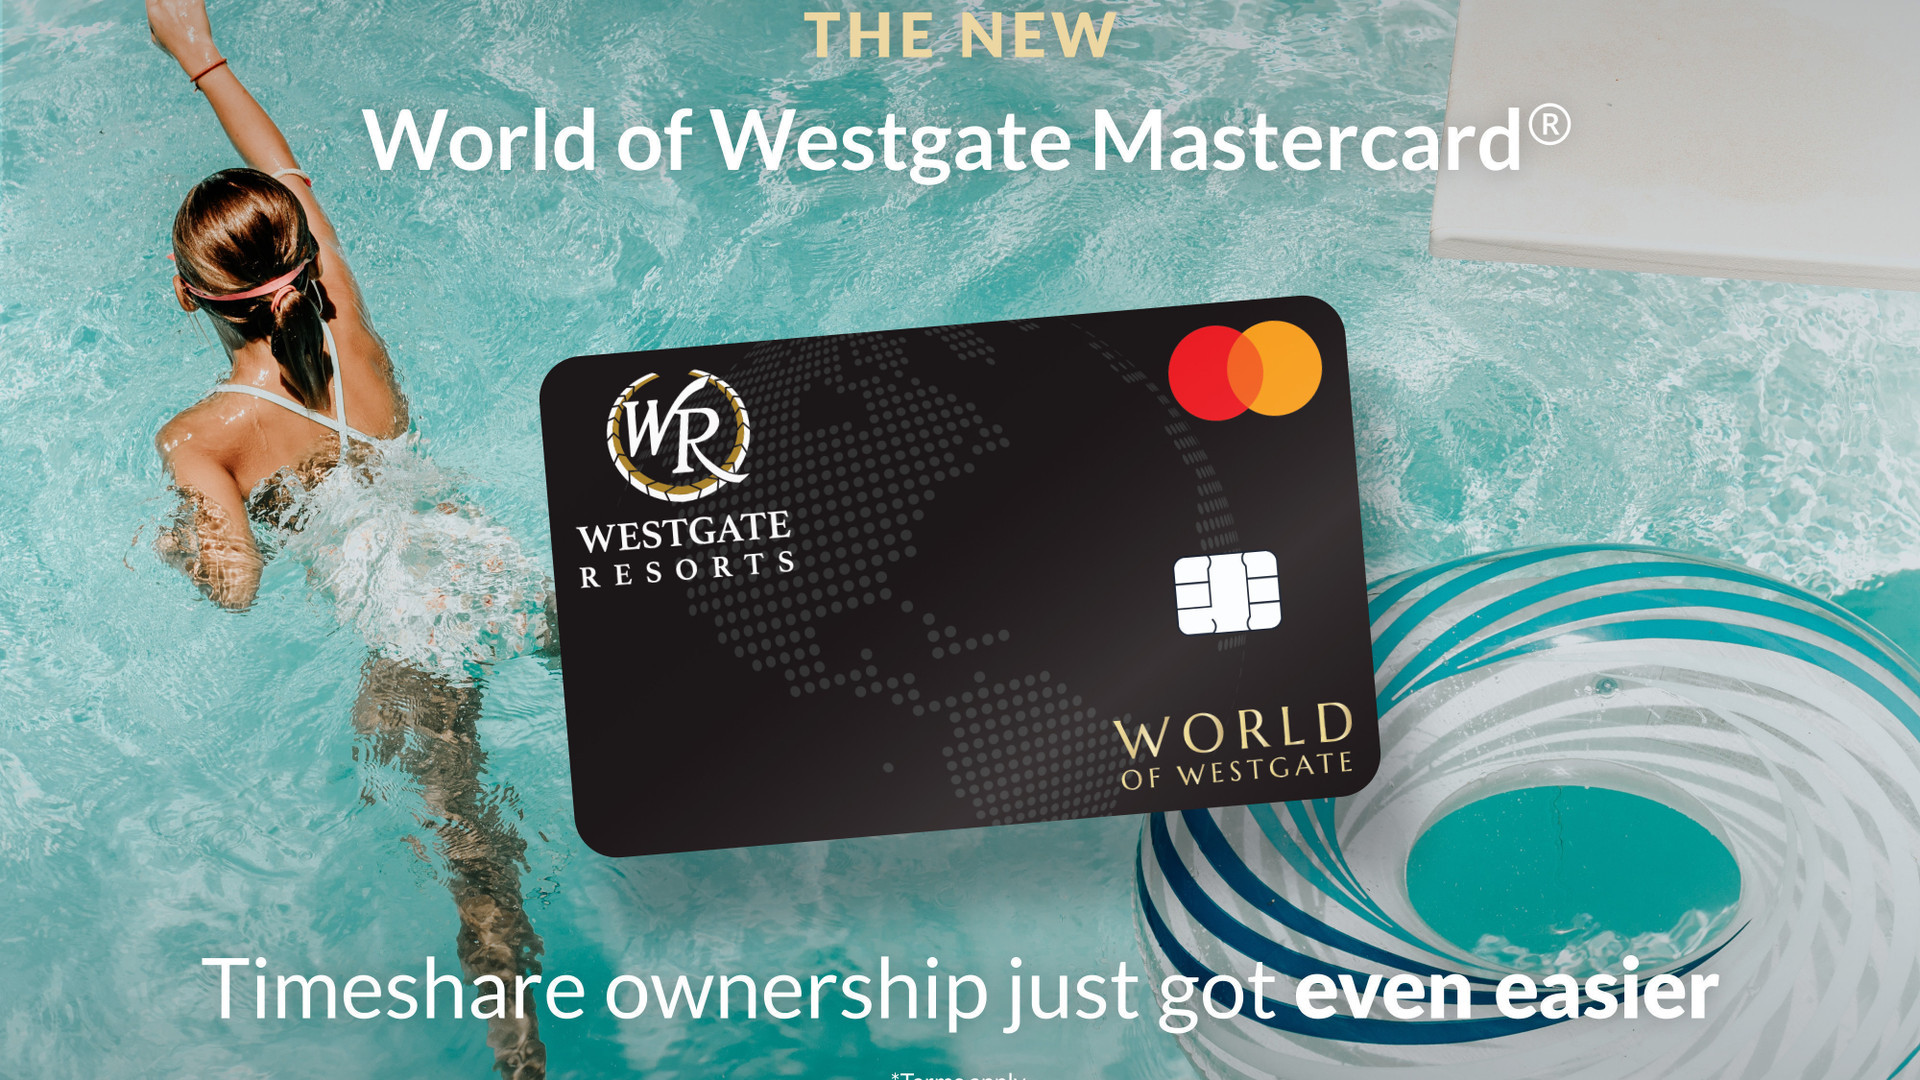 Westgate Resorts and Imprint Launch the New World of Westgate MastercardⓇ Credit Card with Enhanced Rewards-Earning Structure and Special Benefits